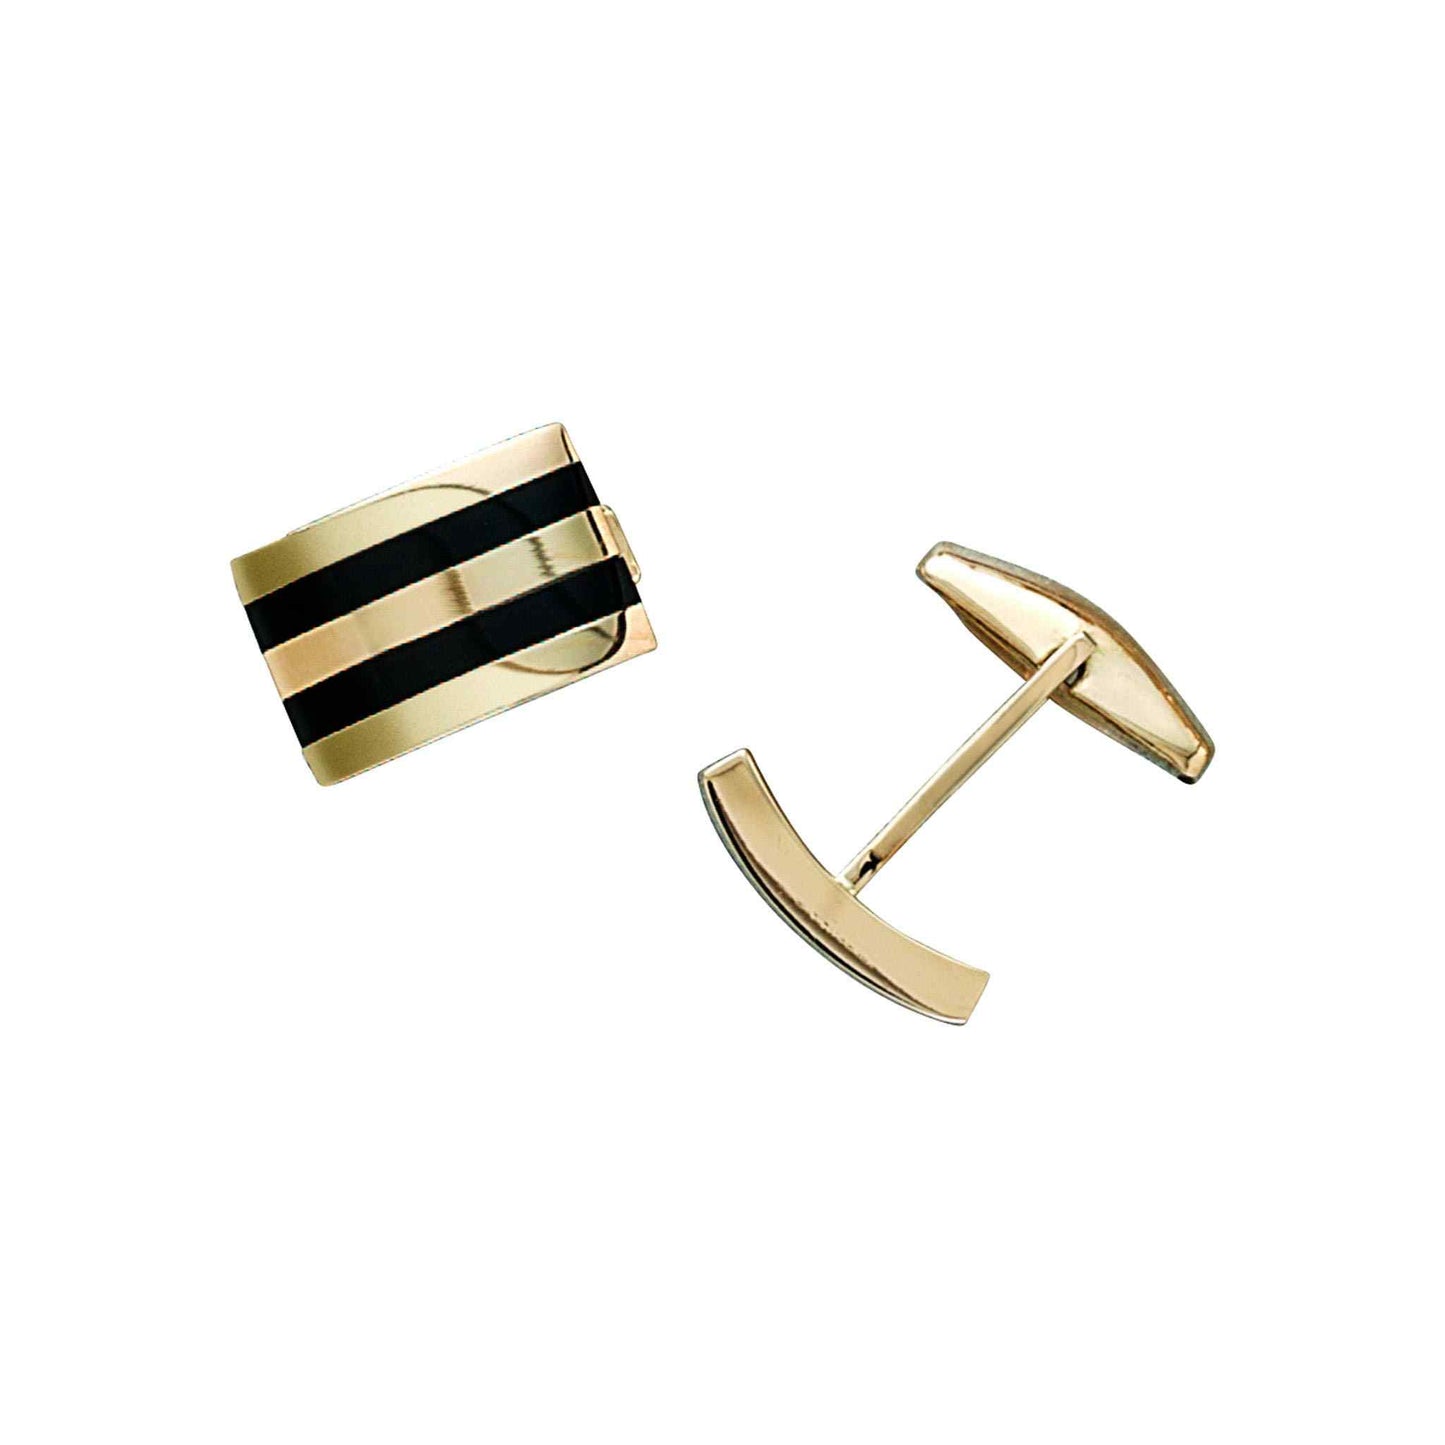 A 14k yellow gold rectangle cufflinks with inlaid onyx bars displayed on a neutral white background.